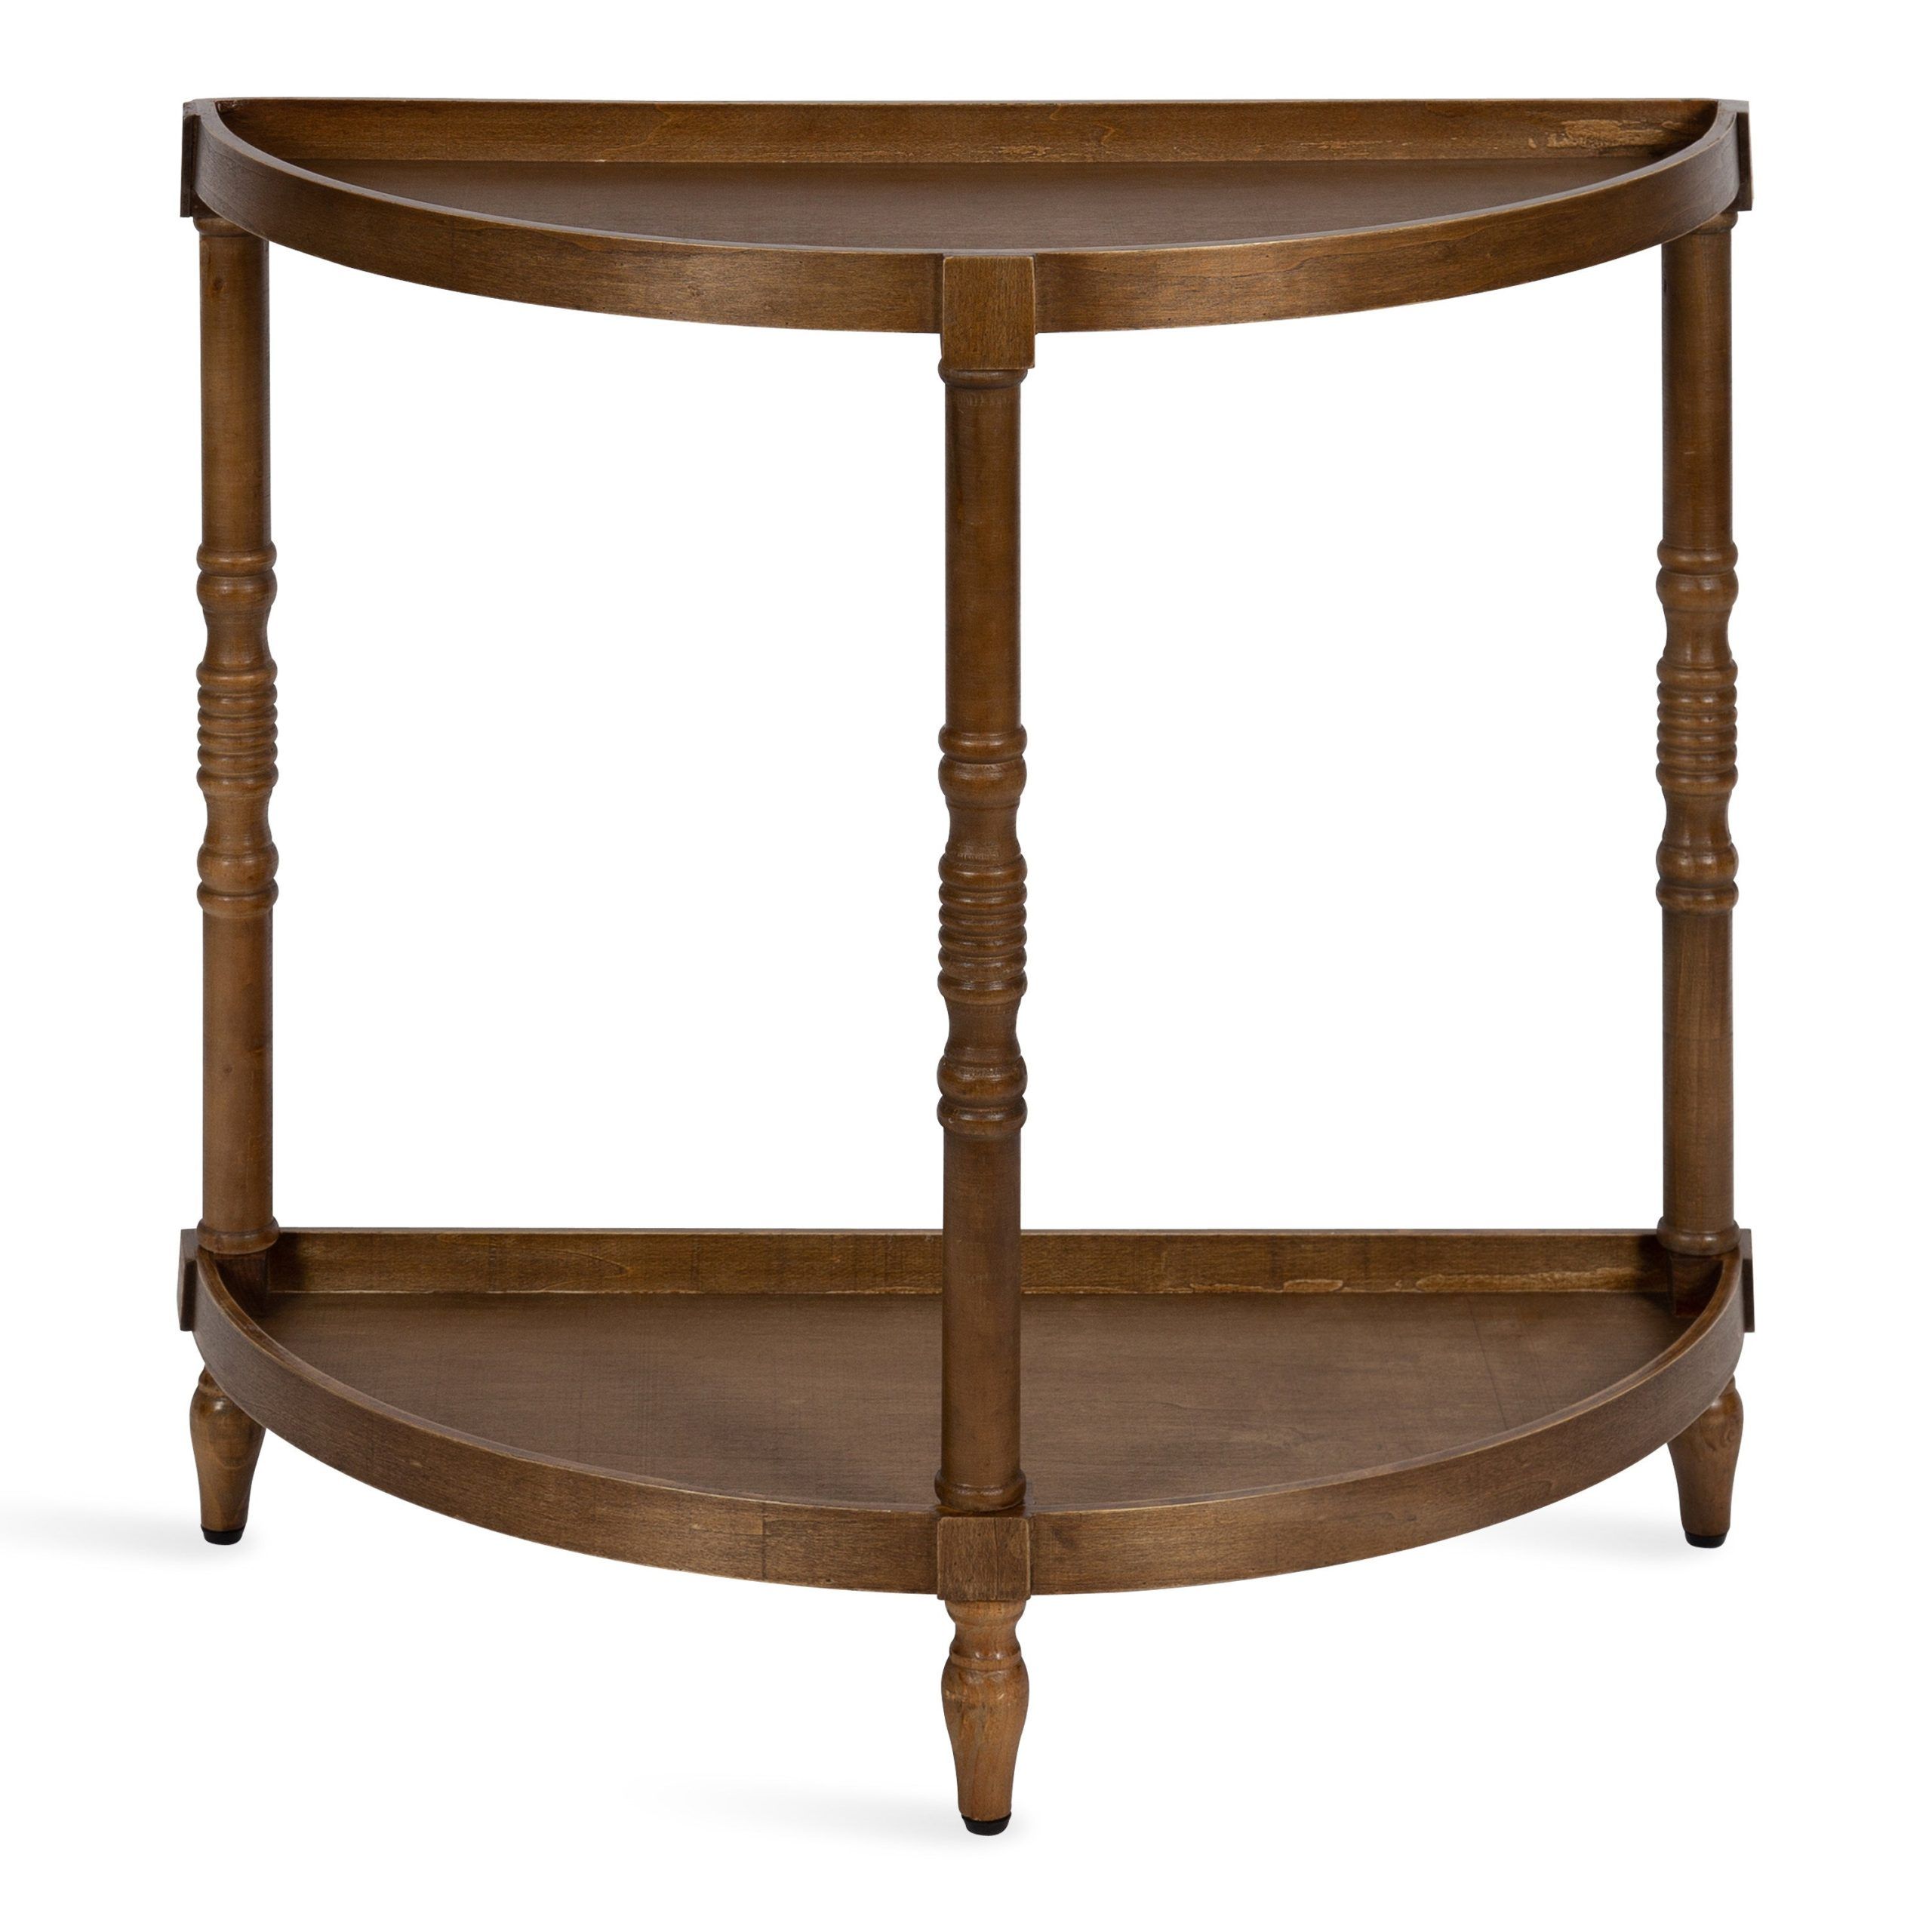 Kate And Laurel Bellport Farmhouse Demilune Console Table, 30 X 14 X 30 With Regard To Kate And Laurel Bellport Farmhouse Drink Tables (View 16 of 20)